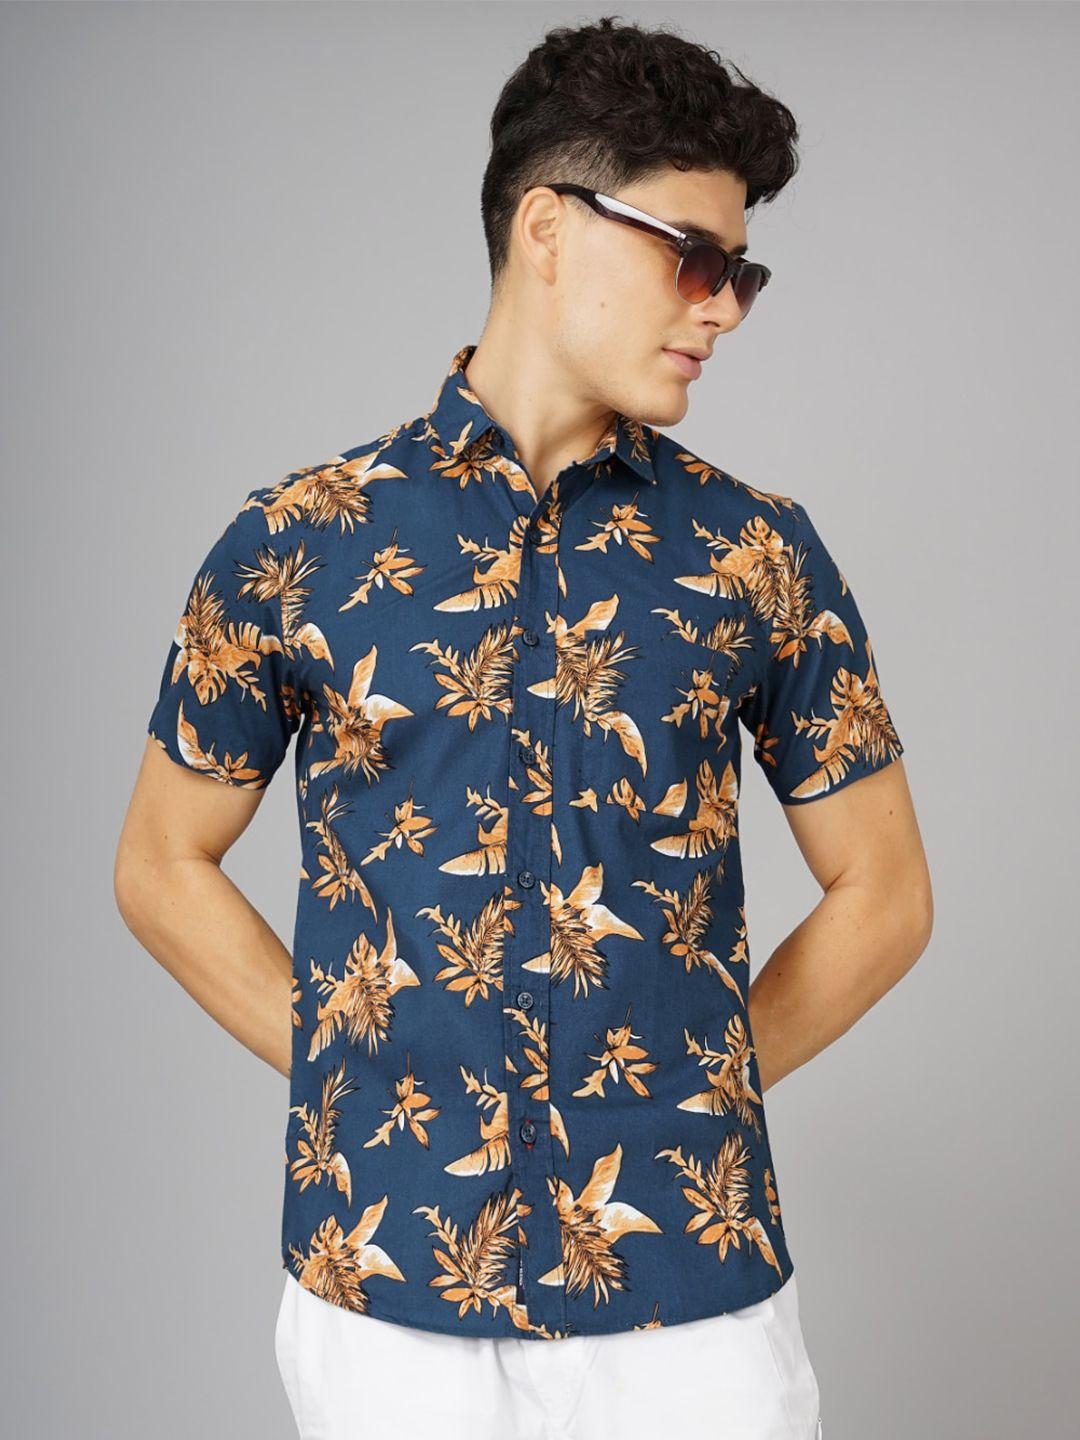 paul-street-standard-slim-fit-floral-printed-spread-collar-cotton-casual-shirt